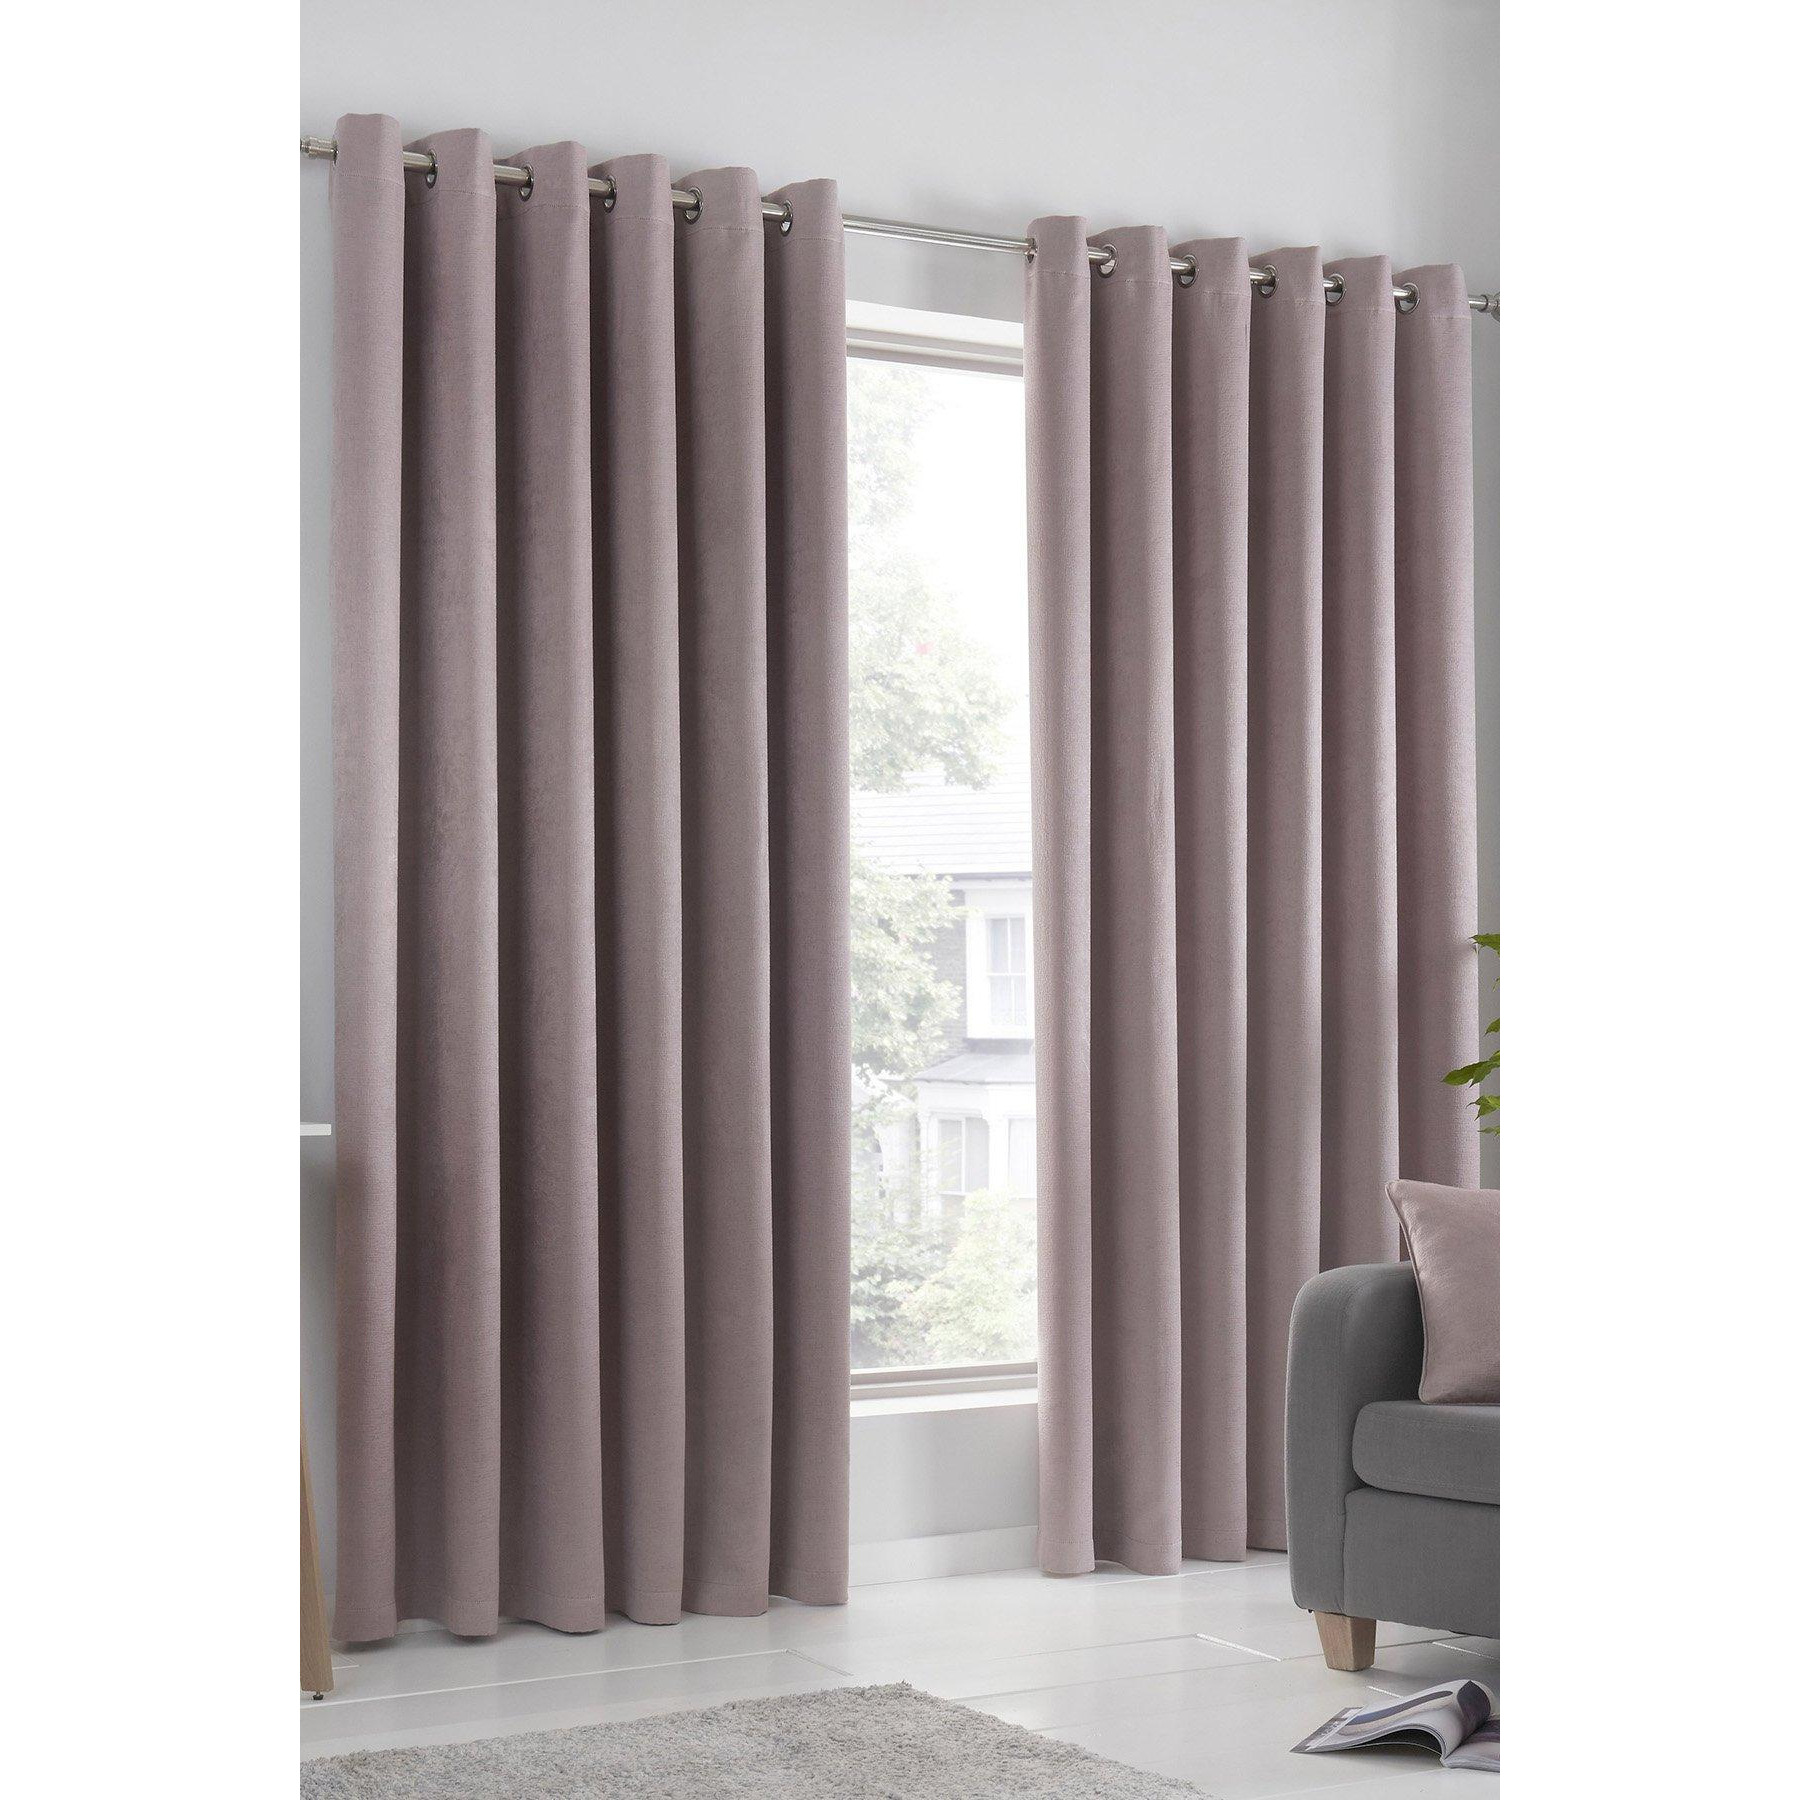 'Strata' Triple-Woven Dimout Eyelet Curtains - image 1